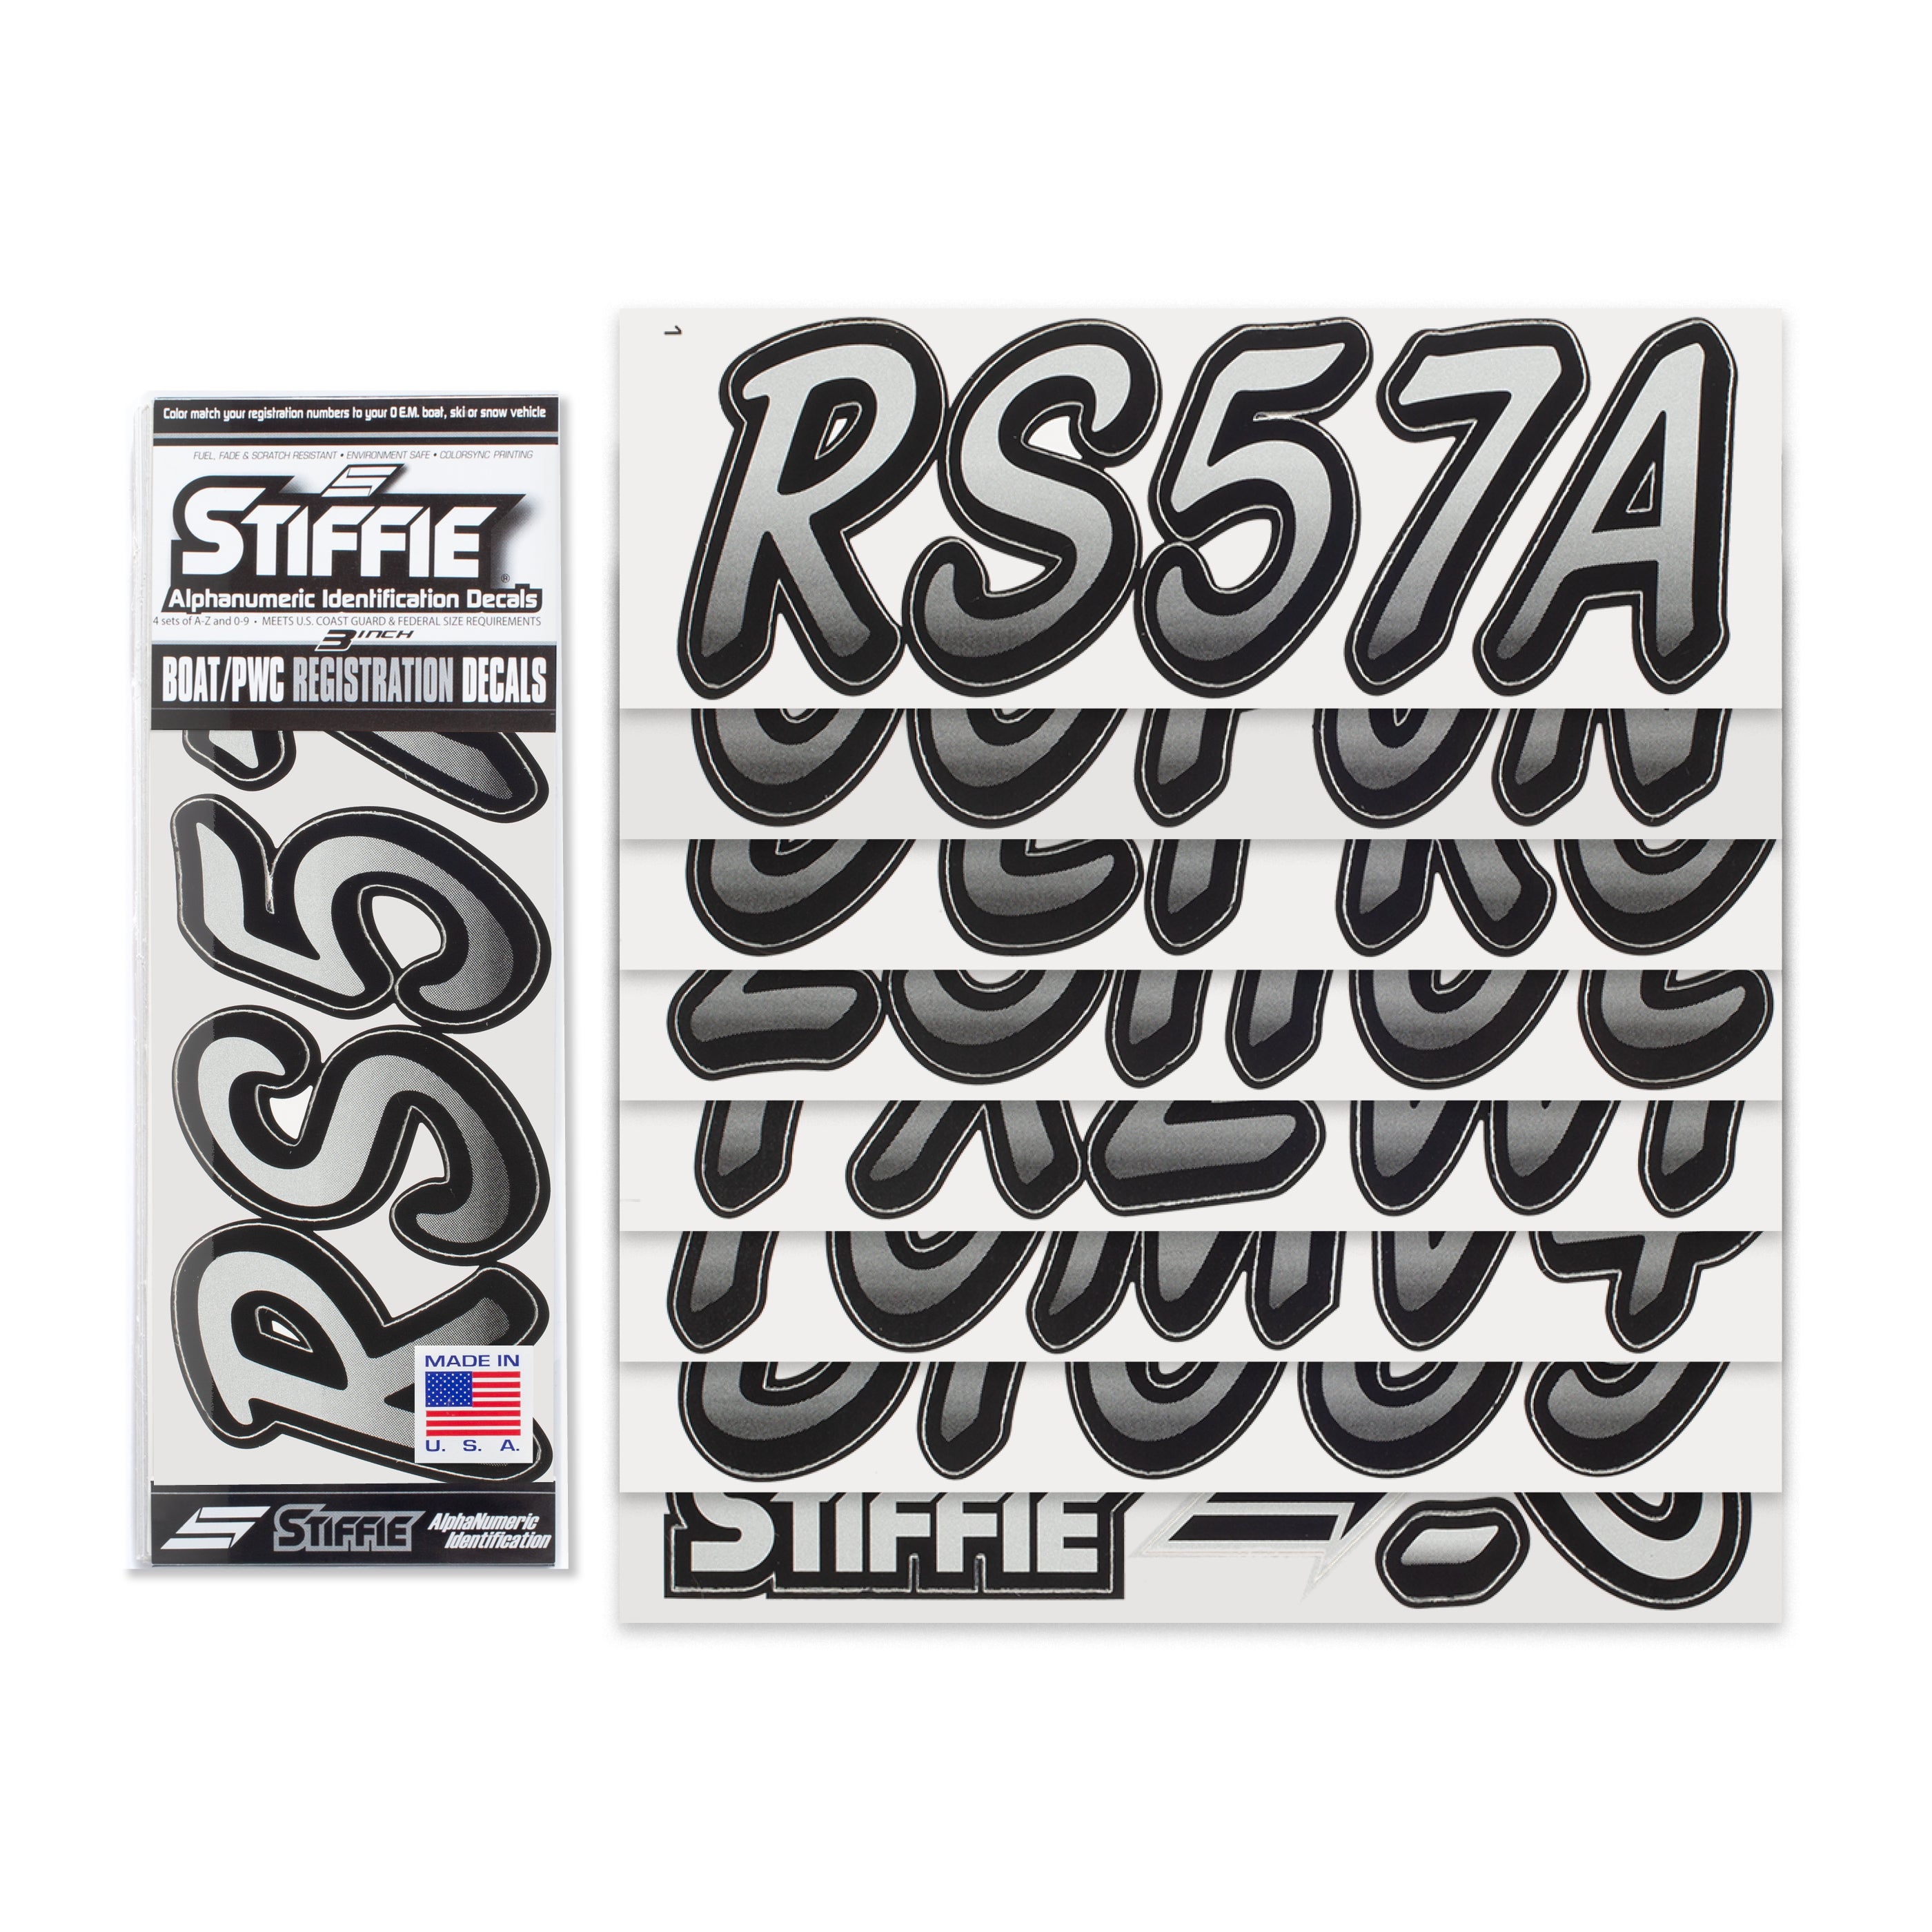 Stiffie Whipline Silver/Black 3" Alpha-Numeric Registration Identification Numbers Stickers Decals for Boats & Personal Watercraft